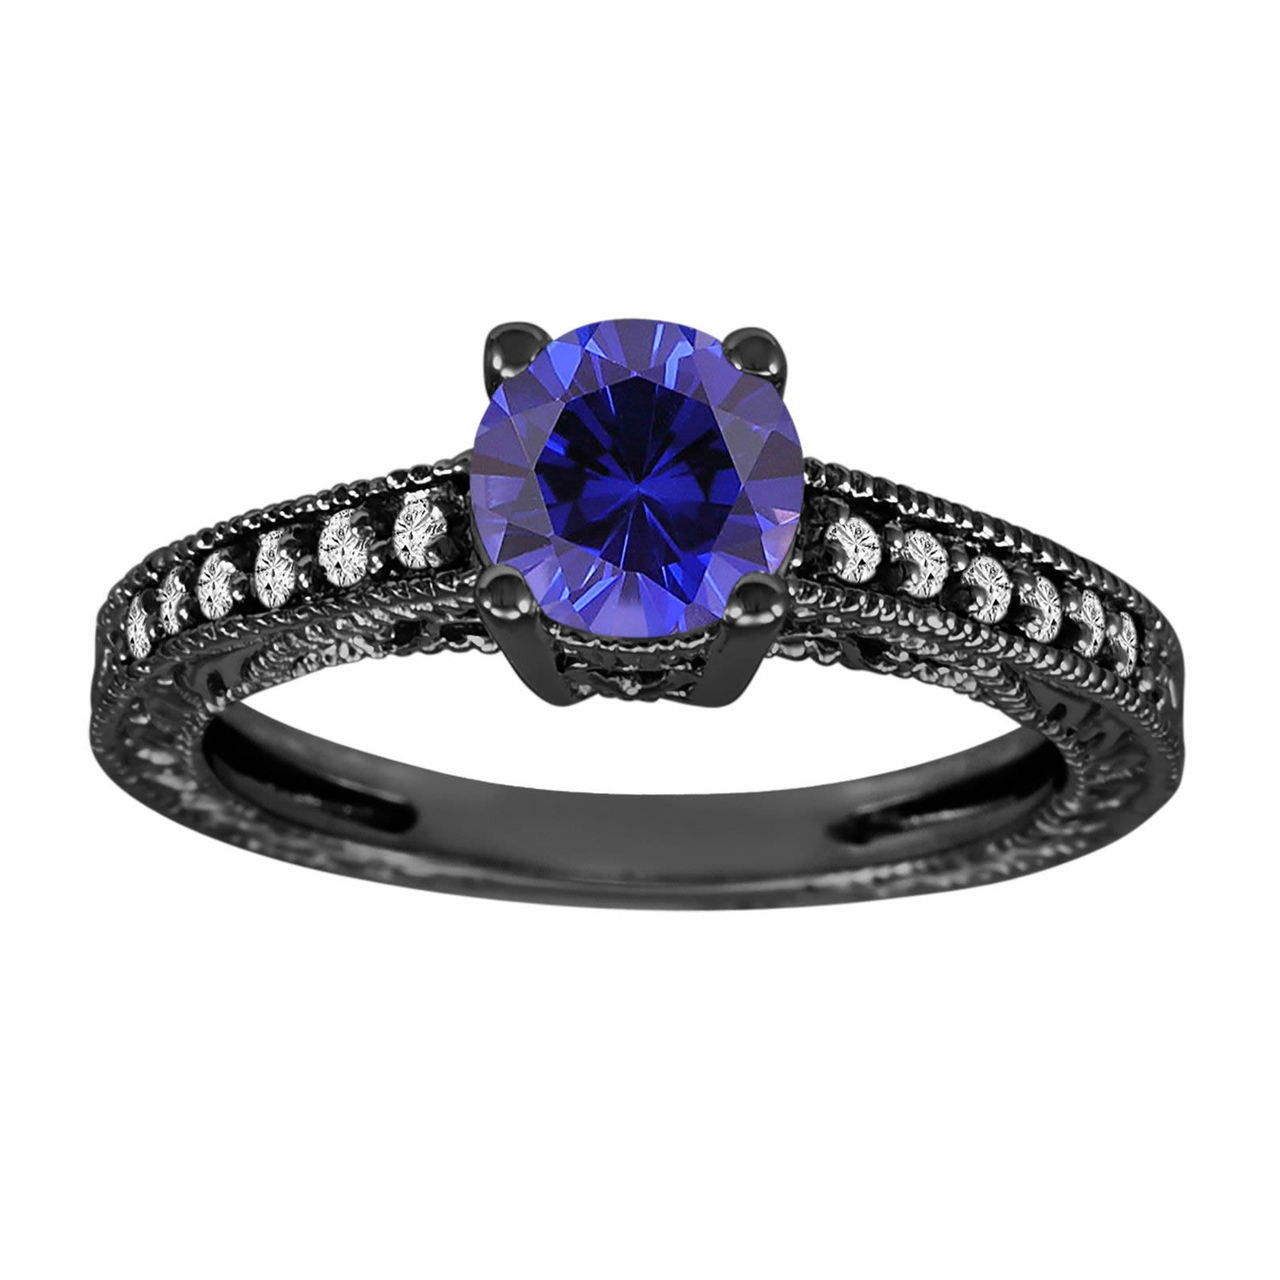 Platinum Tanzanite Engagement Ring, With Diamonds Wedding Ring, Unique  Vintage Style 1.05 Carat Pave Handmade Certified